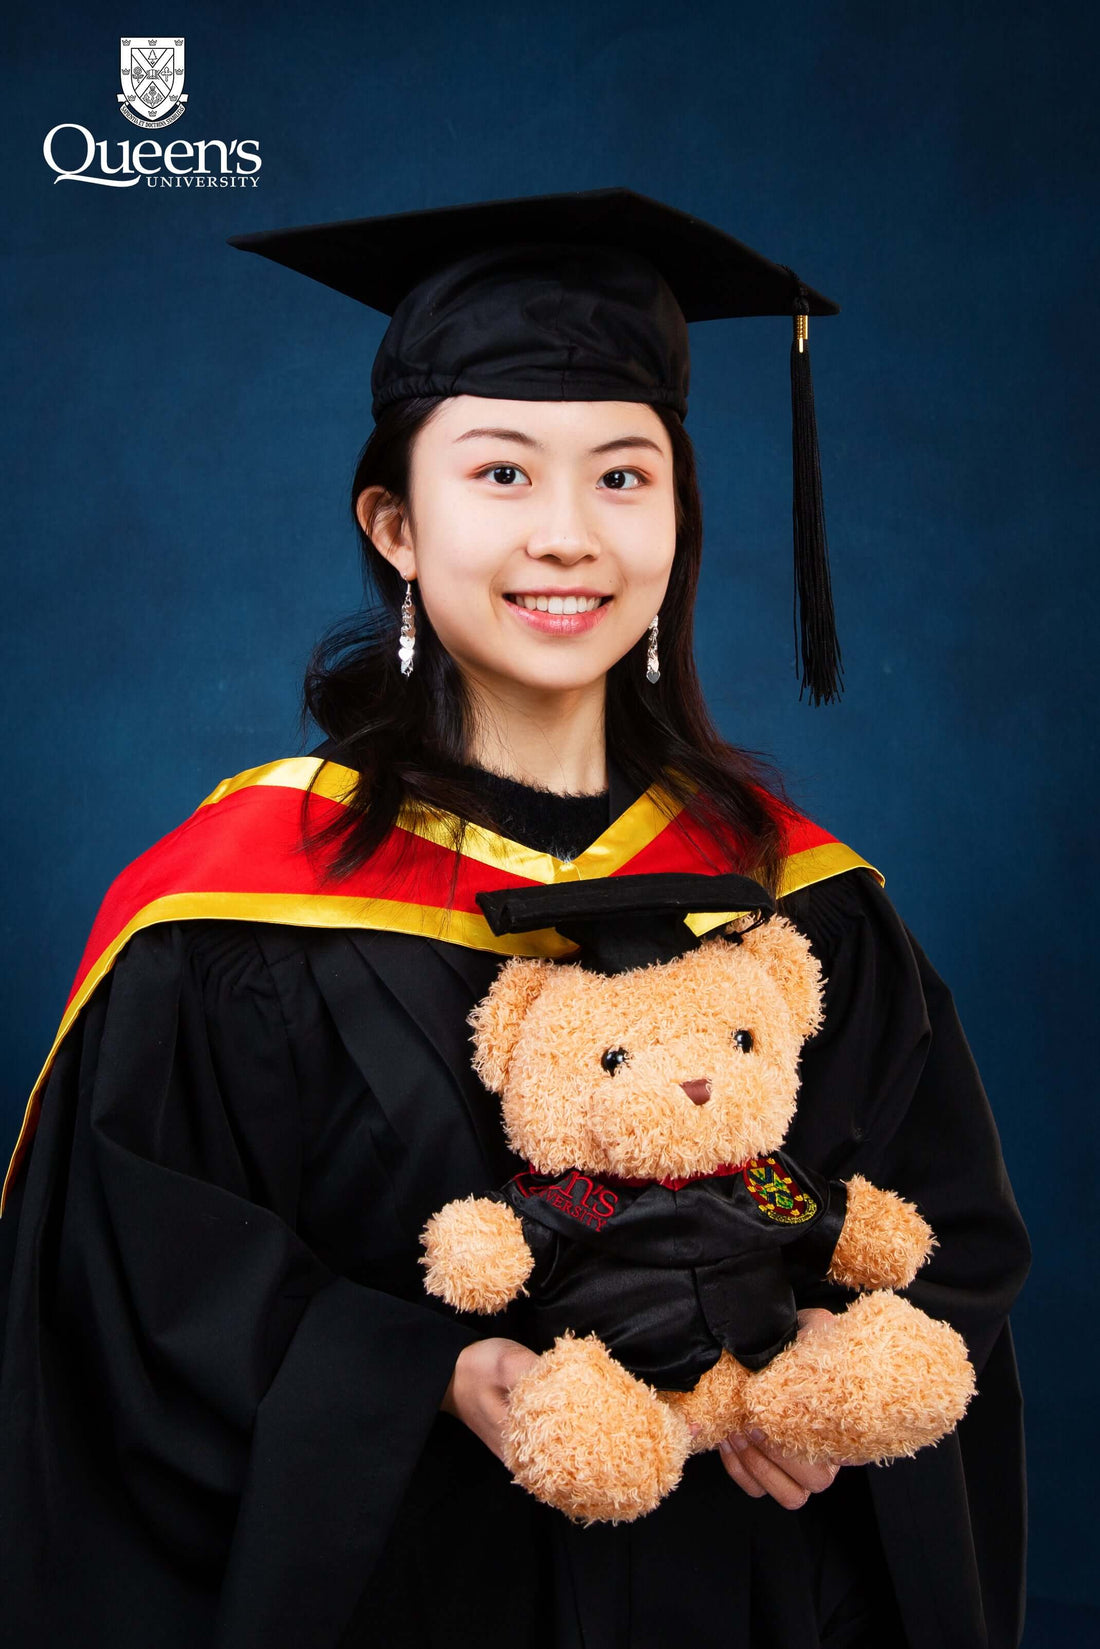 Tsing Photography offers an early bird discount on graduation photo packages for graduates